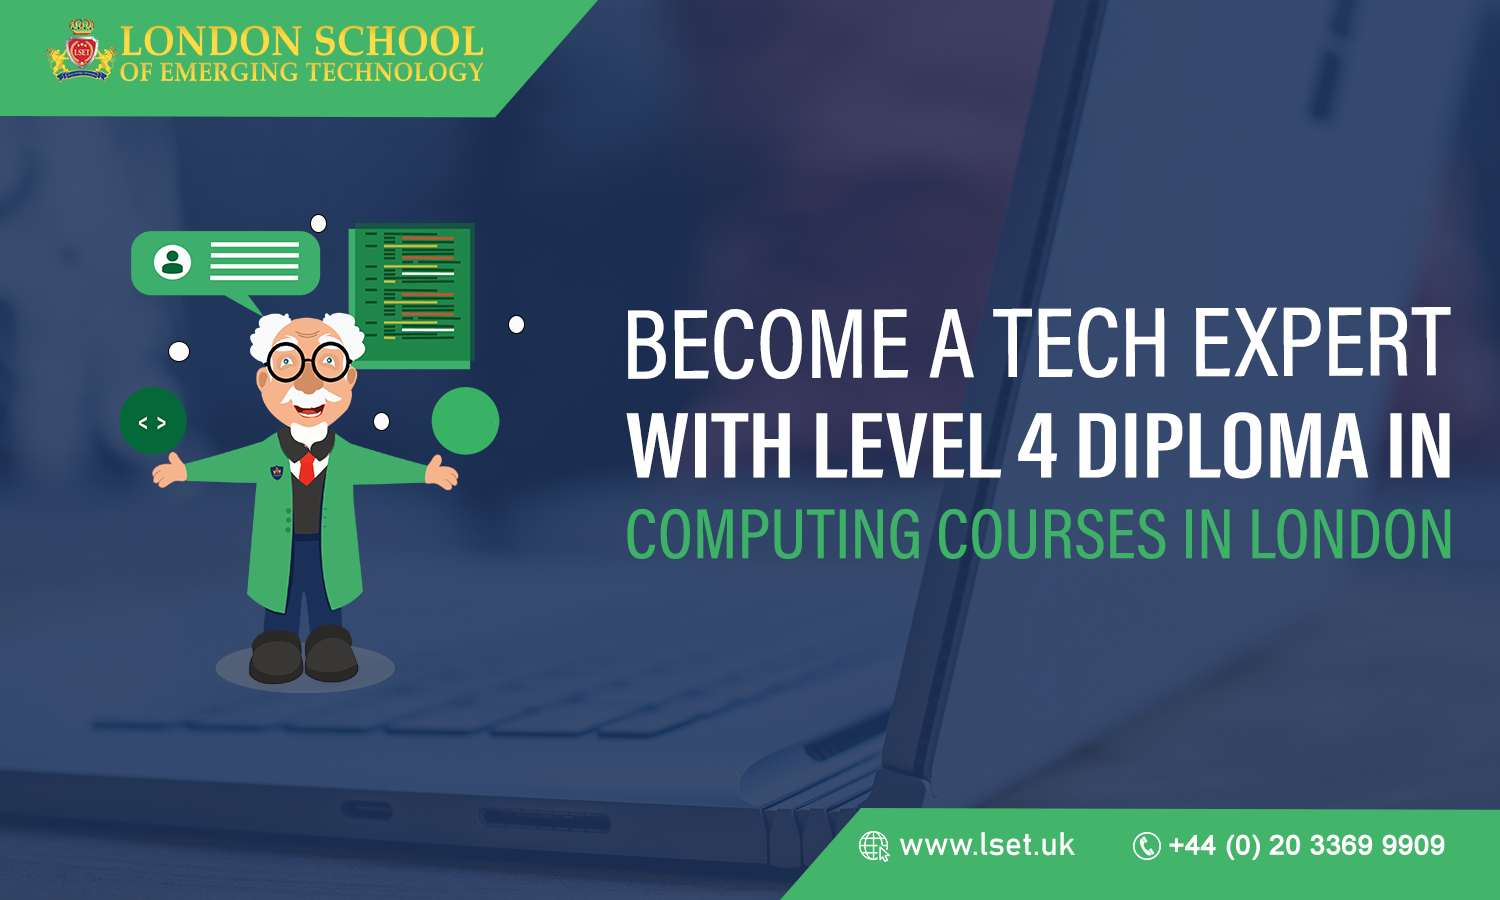 Become a Tech Expert with Level 4 Diploma in Computing Courses in London 4.48.19 PM